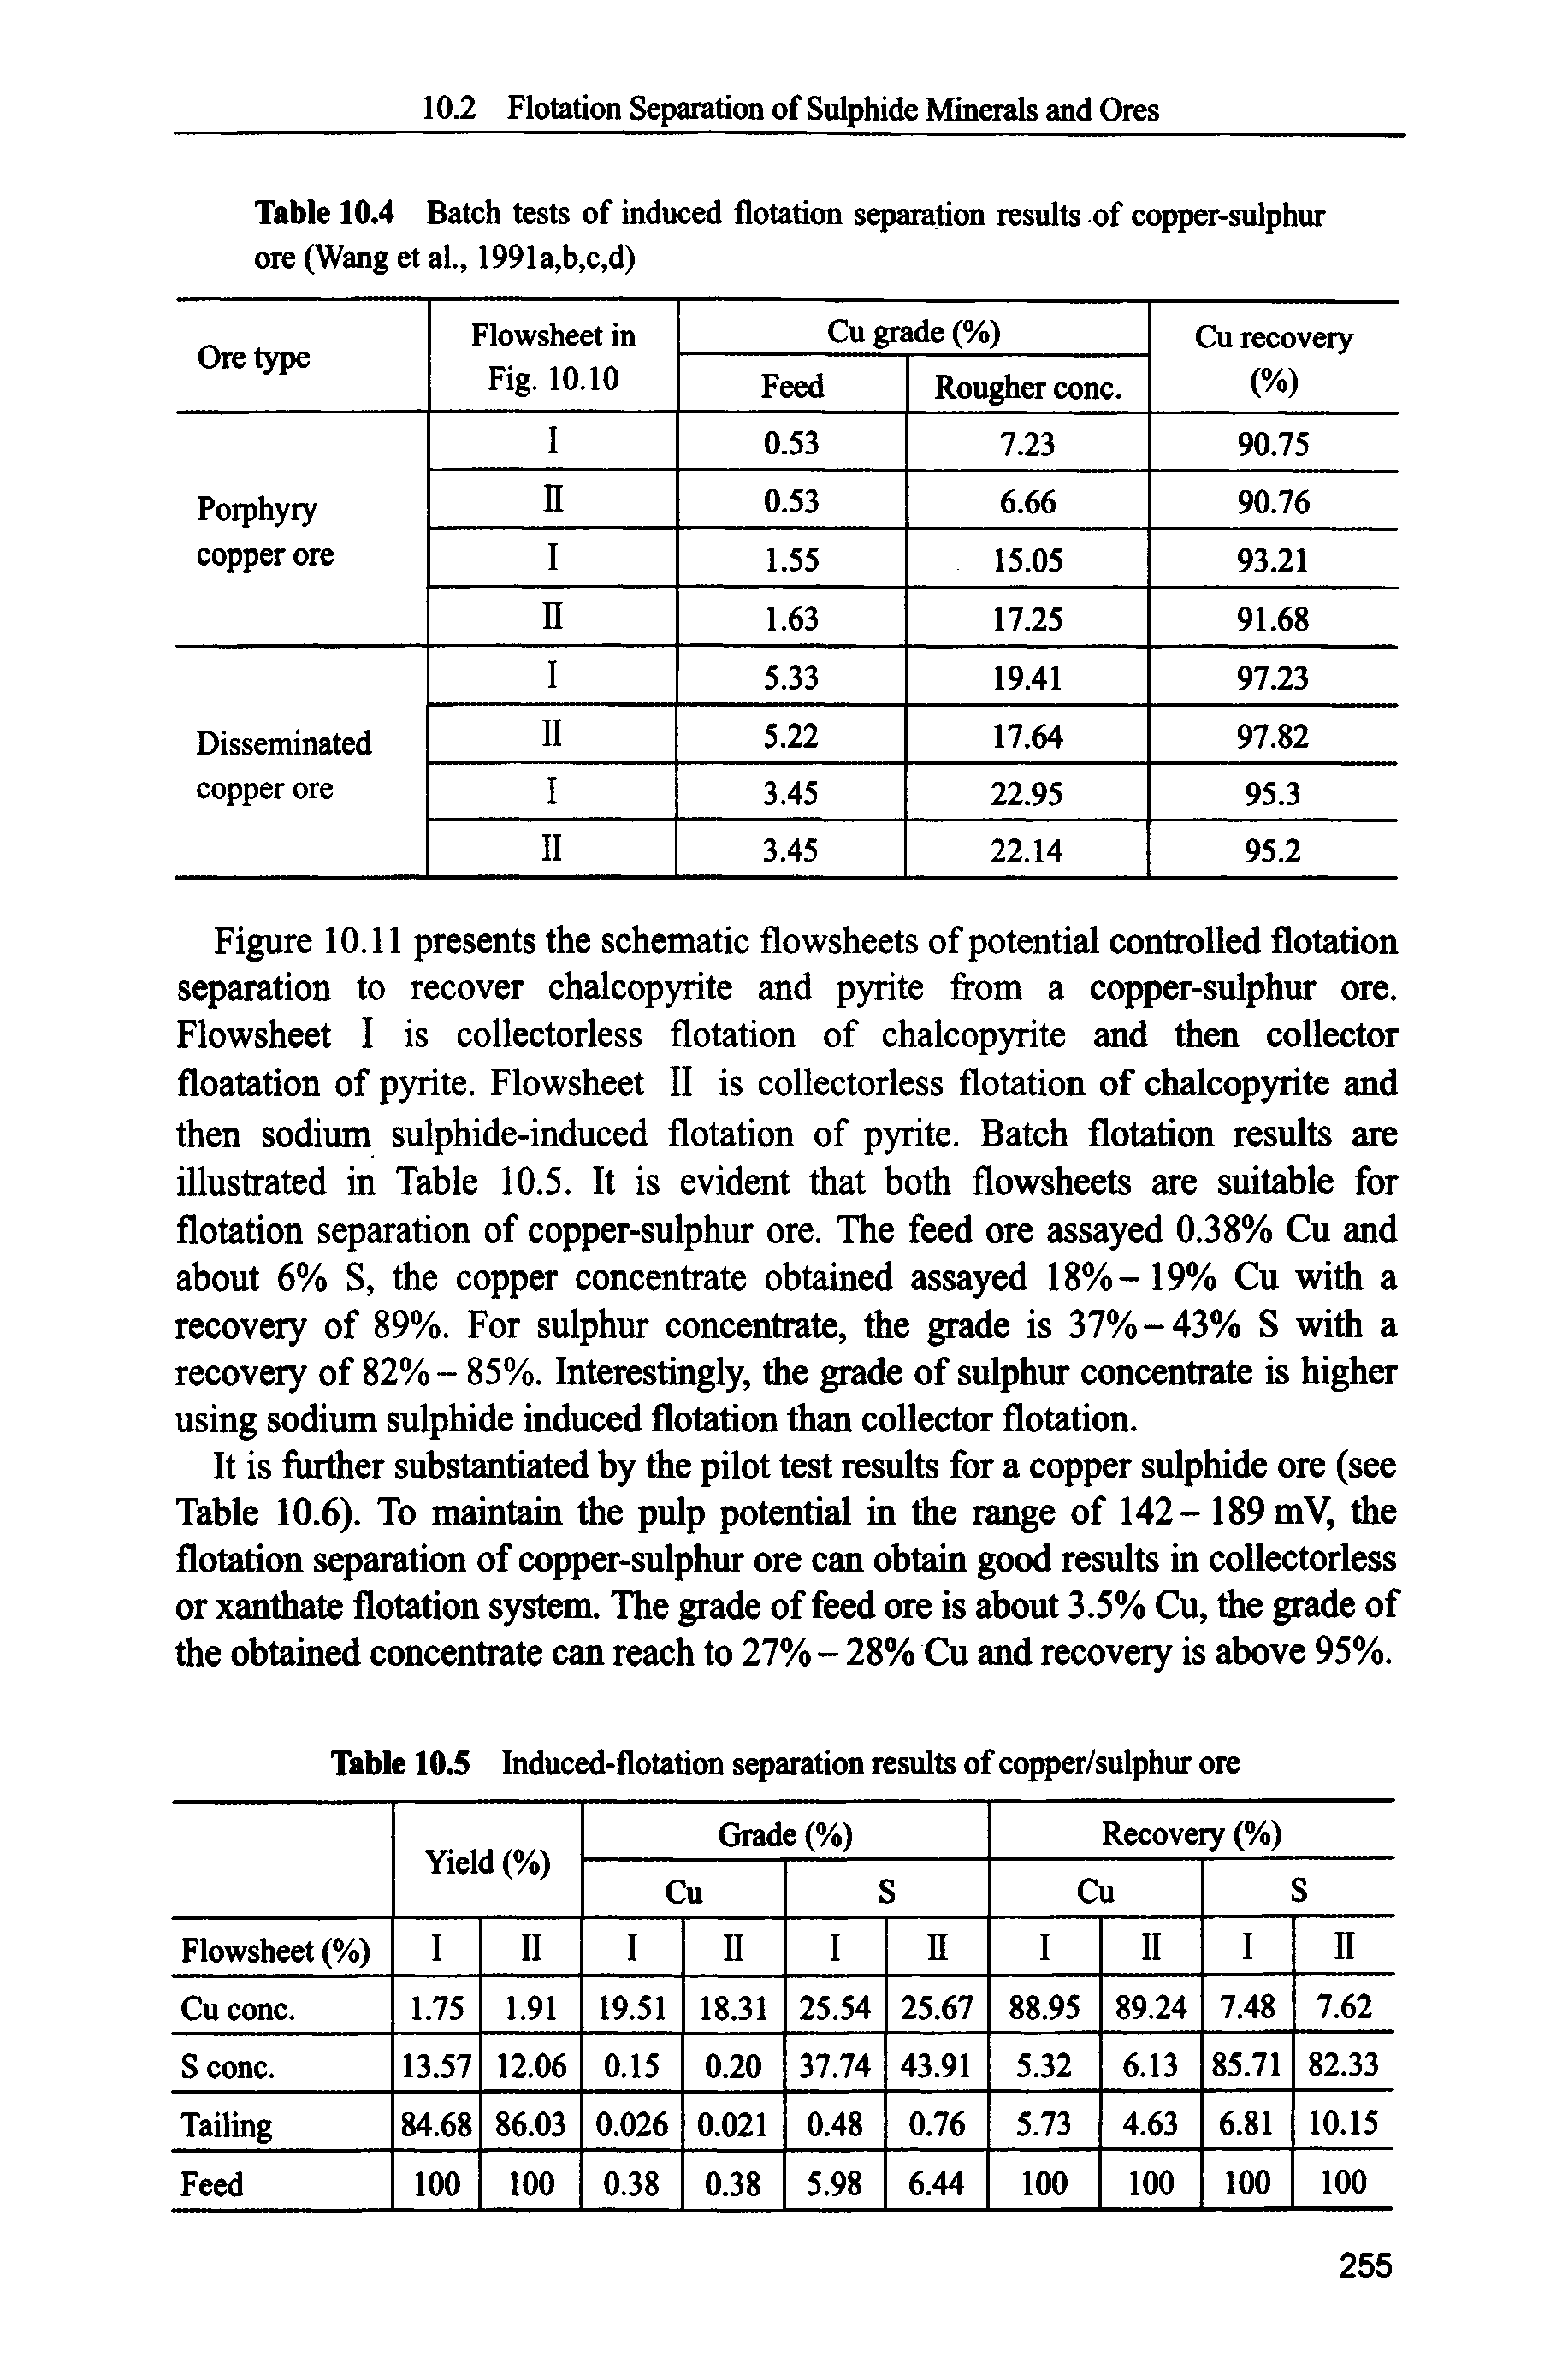 Table 10.4 Batch tests of induced flotation separation results of copper-sulphur ore (Wang et al., 1991a,b,c,d)...